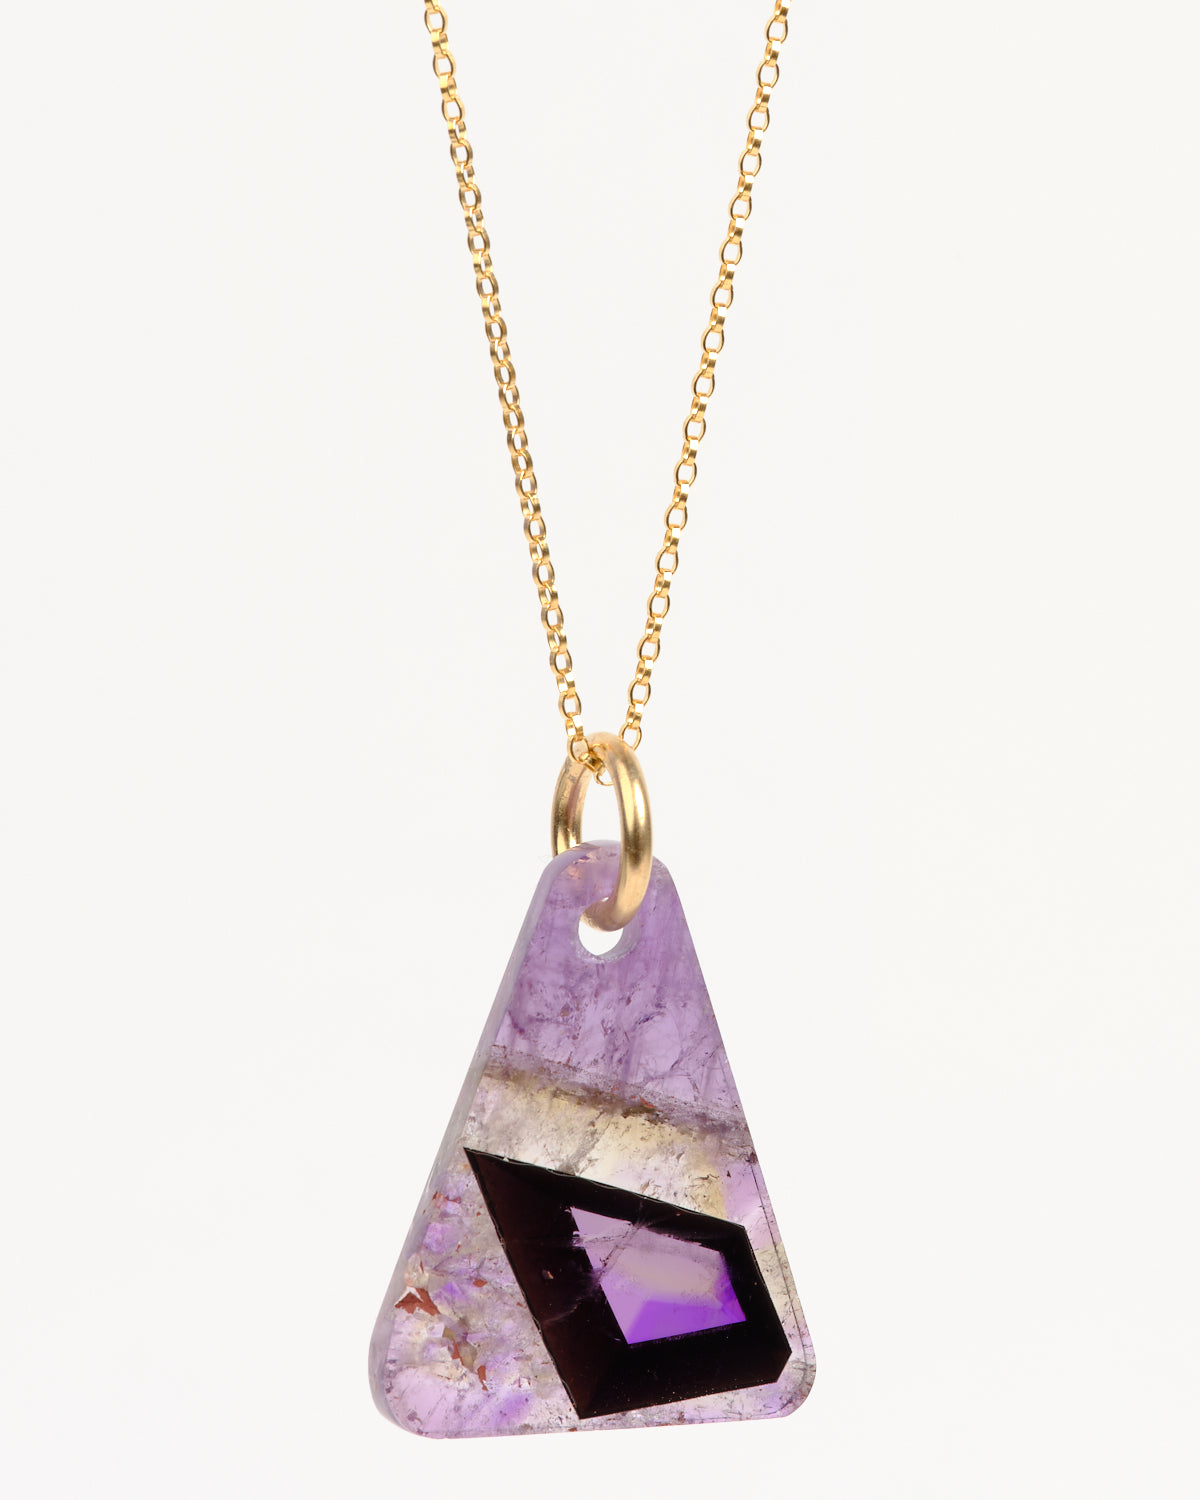 Amethyst (with Rare Crystal Inclusion) Pendant